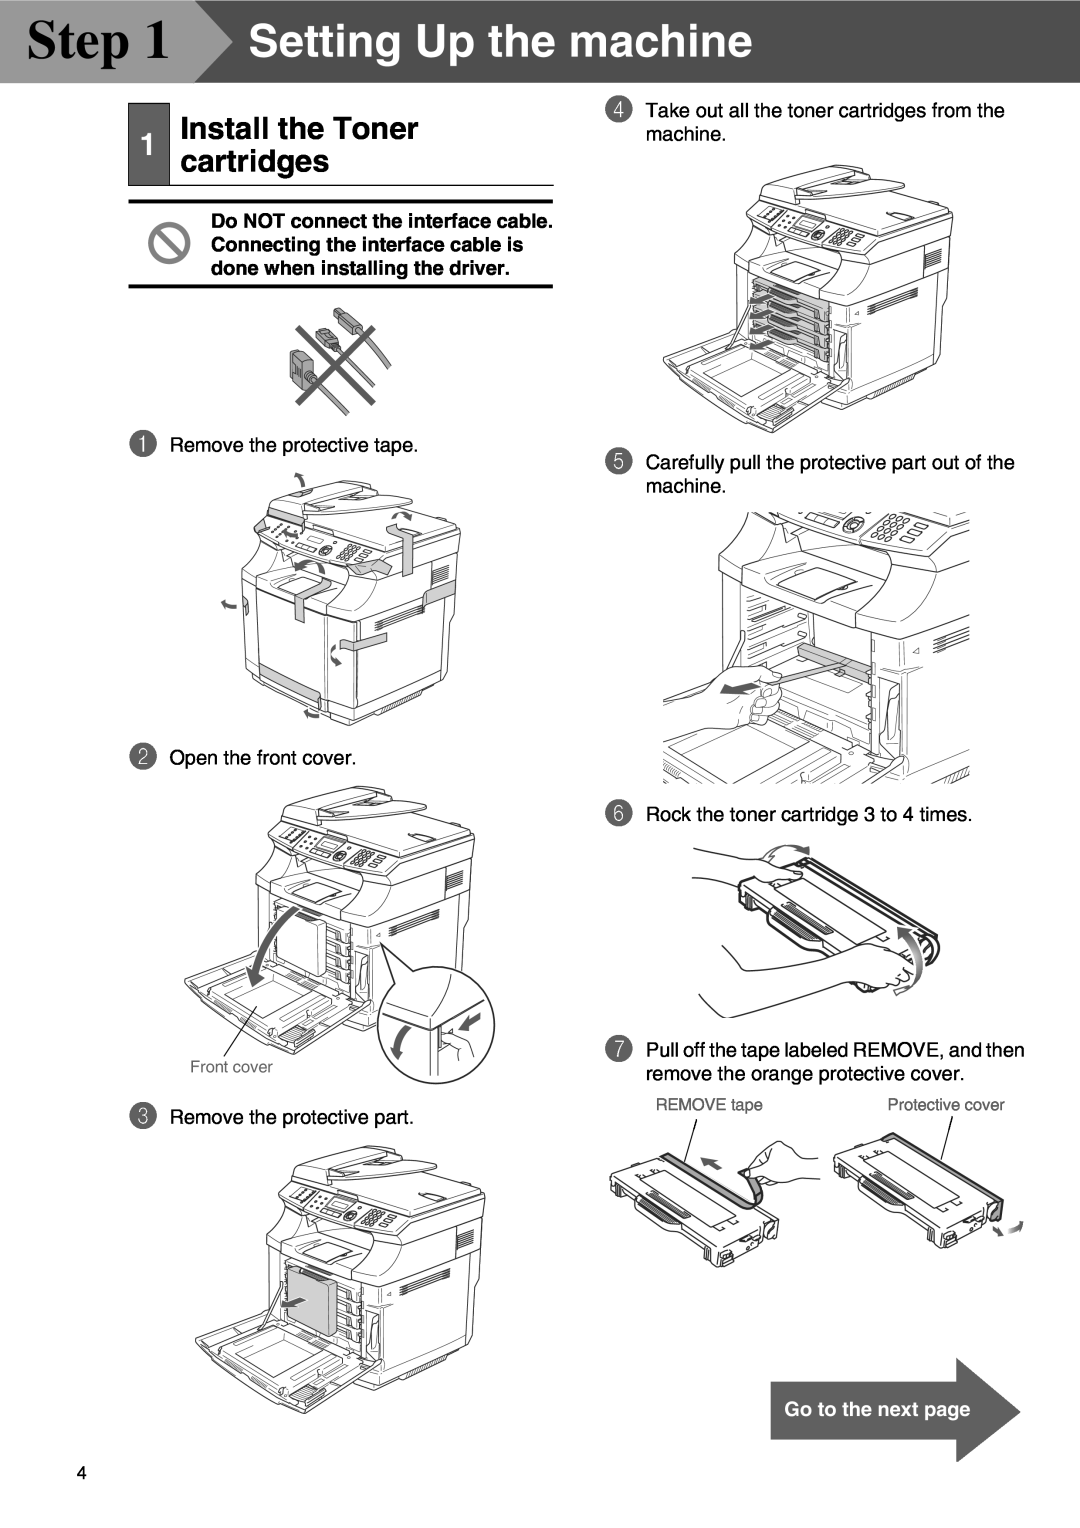 Microsoft SPC210SF setup guide Setting Up the machine, Install the Toner cartridges, Go to the next page 